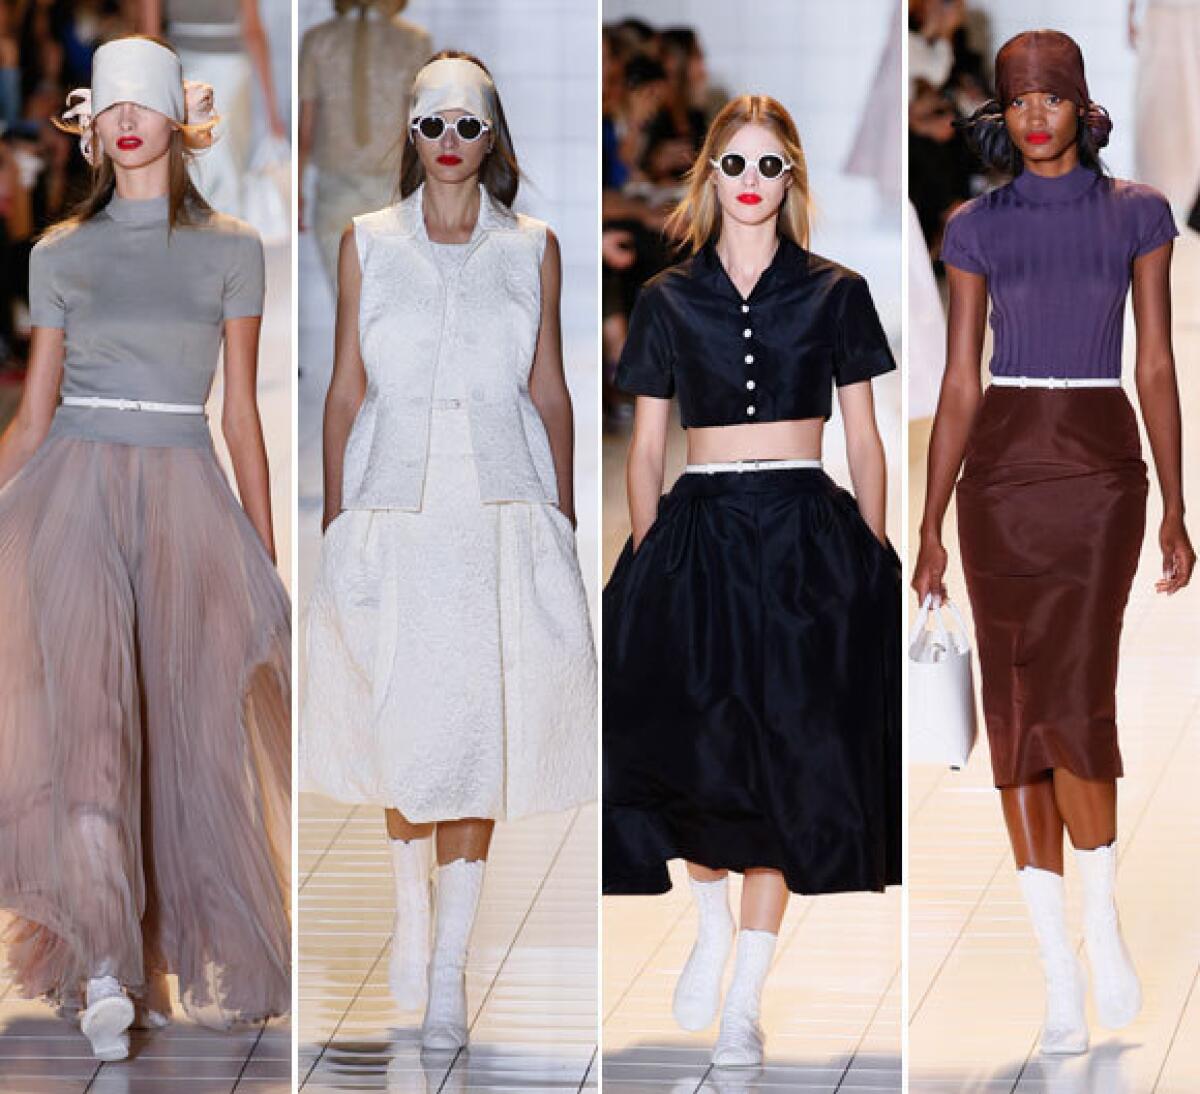 Looks from the Rochas spring-summer 2013 runway collection shown during Paris Fashion Week.